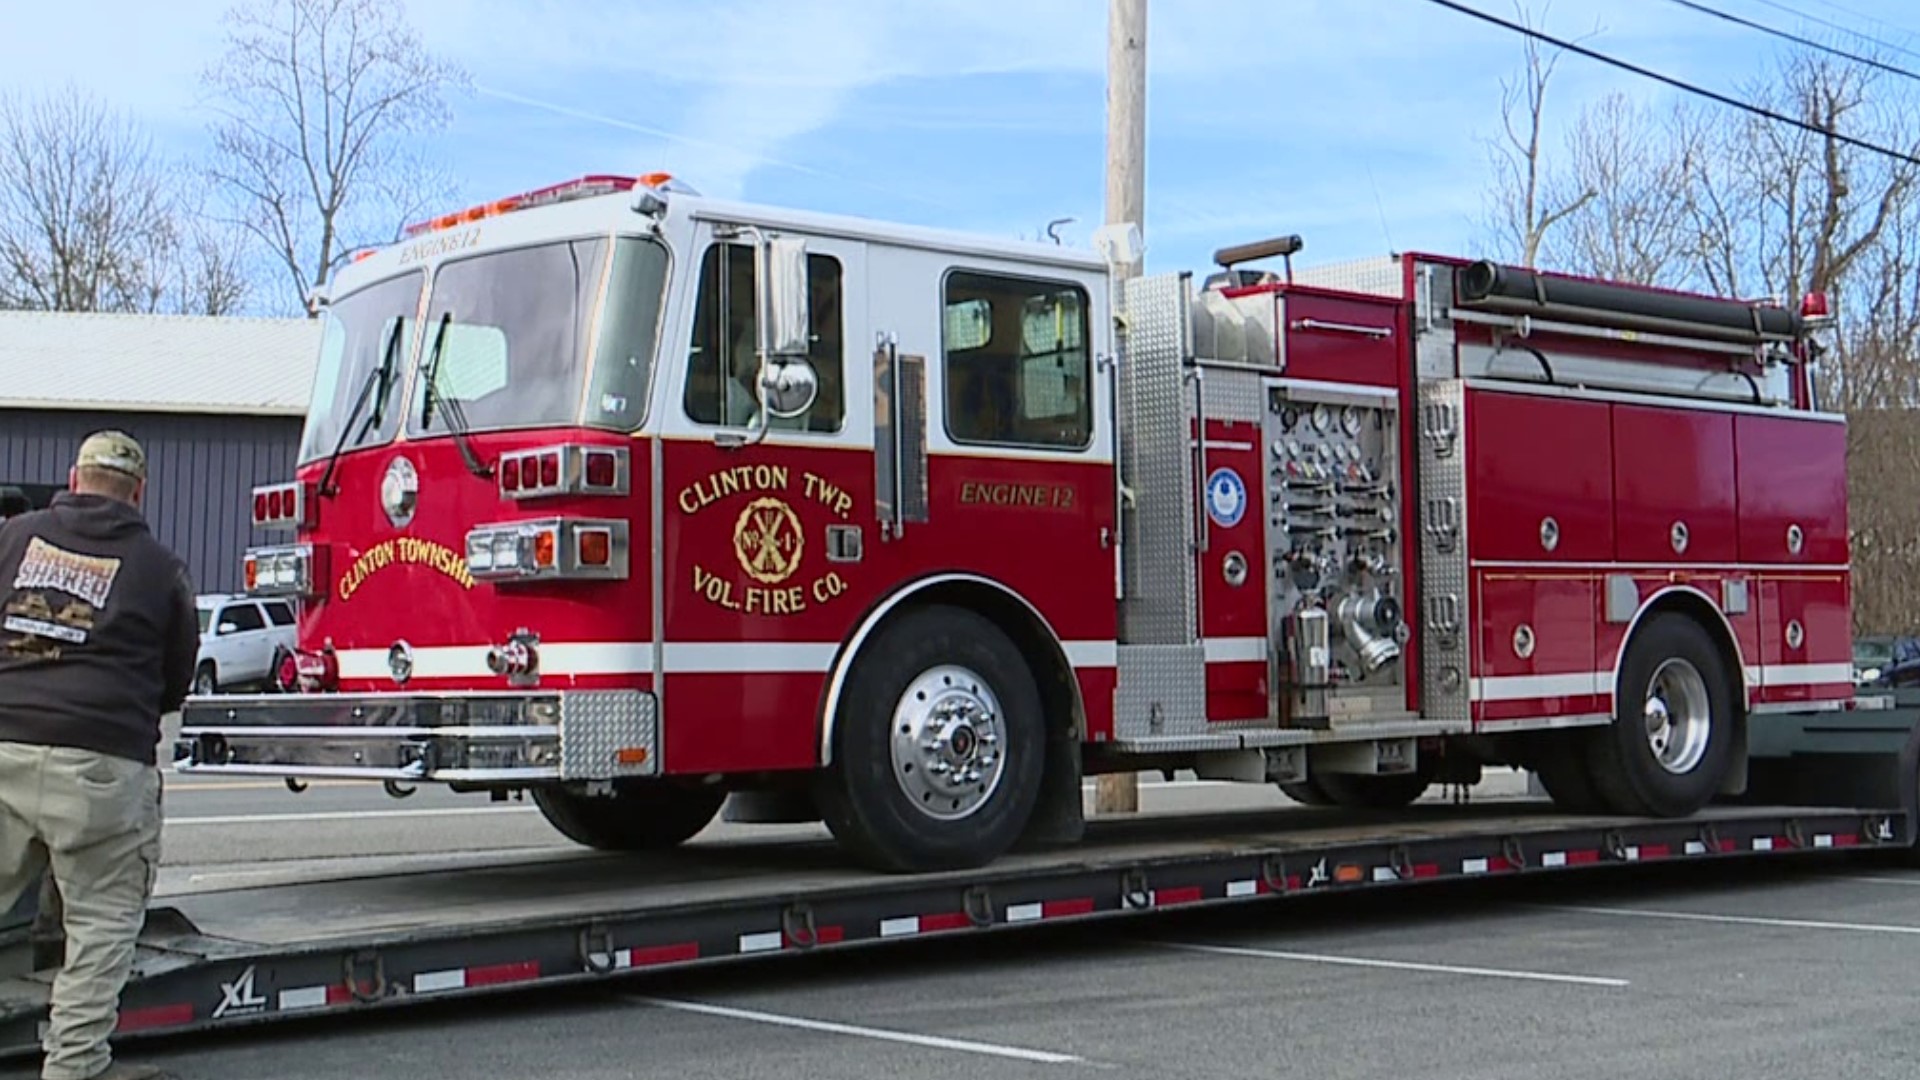 The Clinton Township Volunteer Fire Company is donating a fire truck to a fire department in Kentucky.